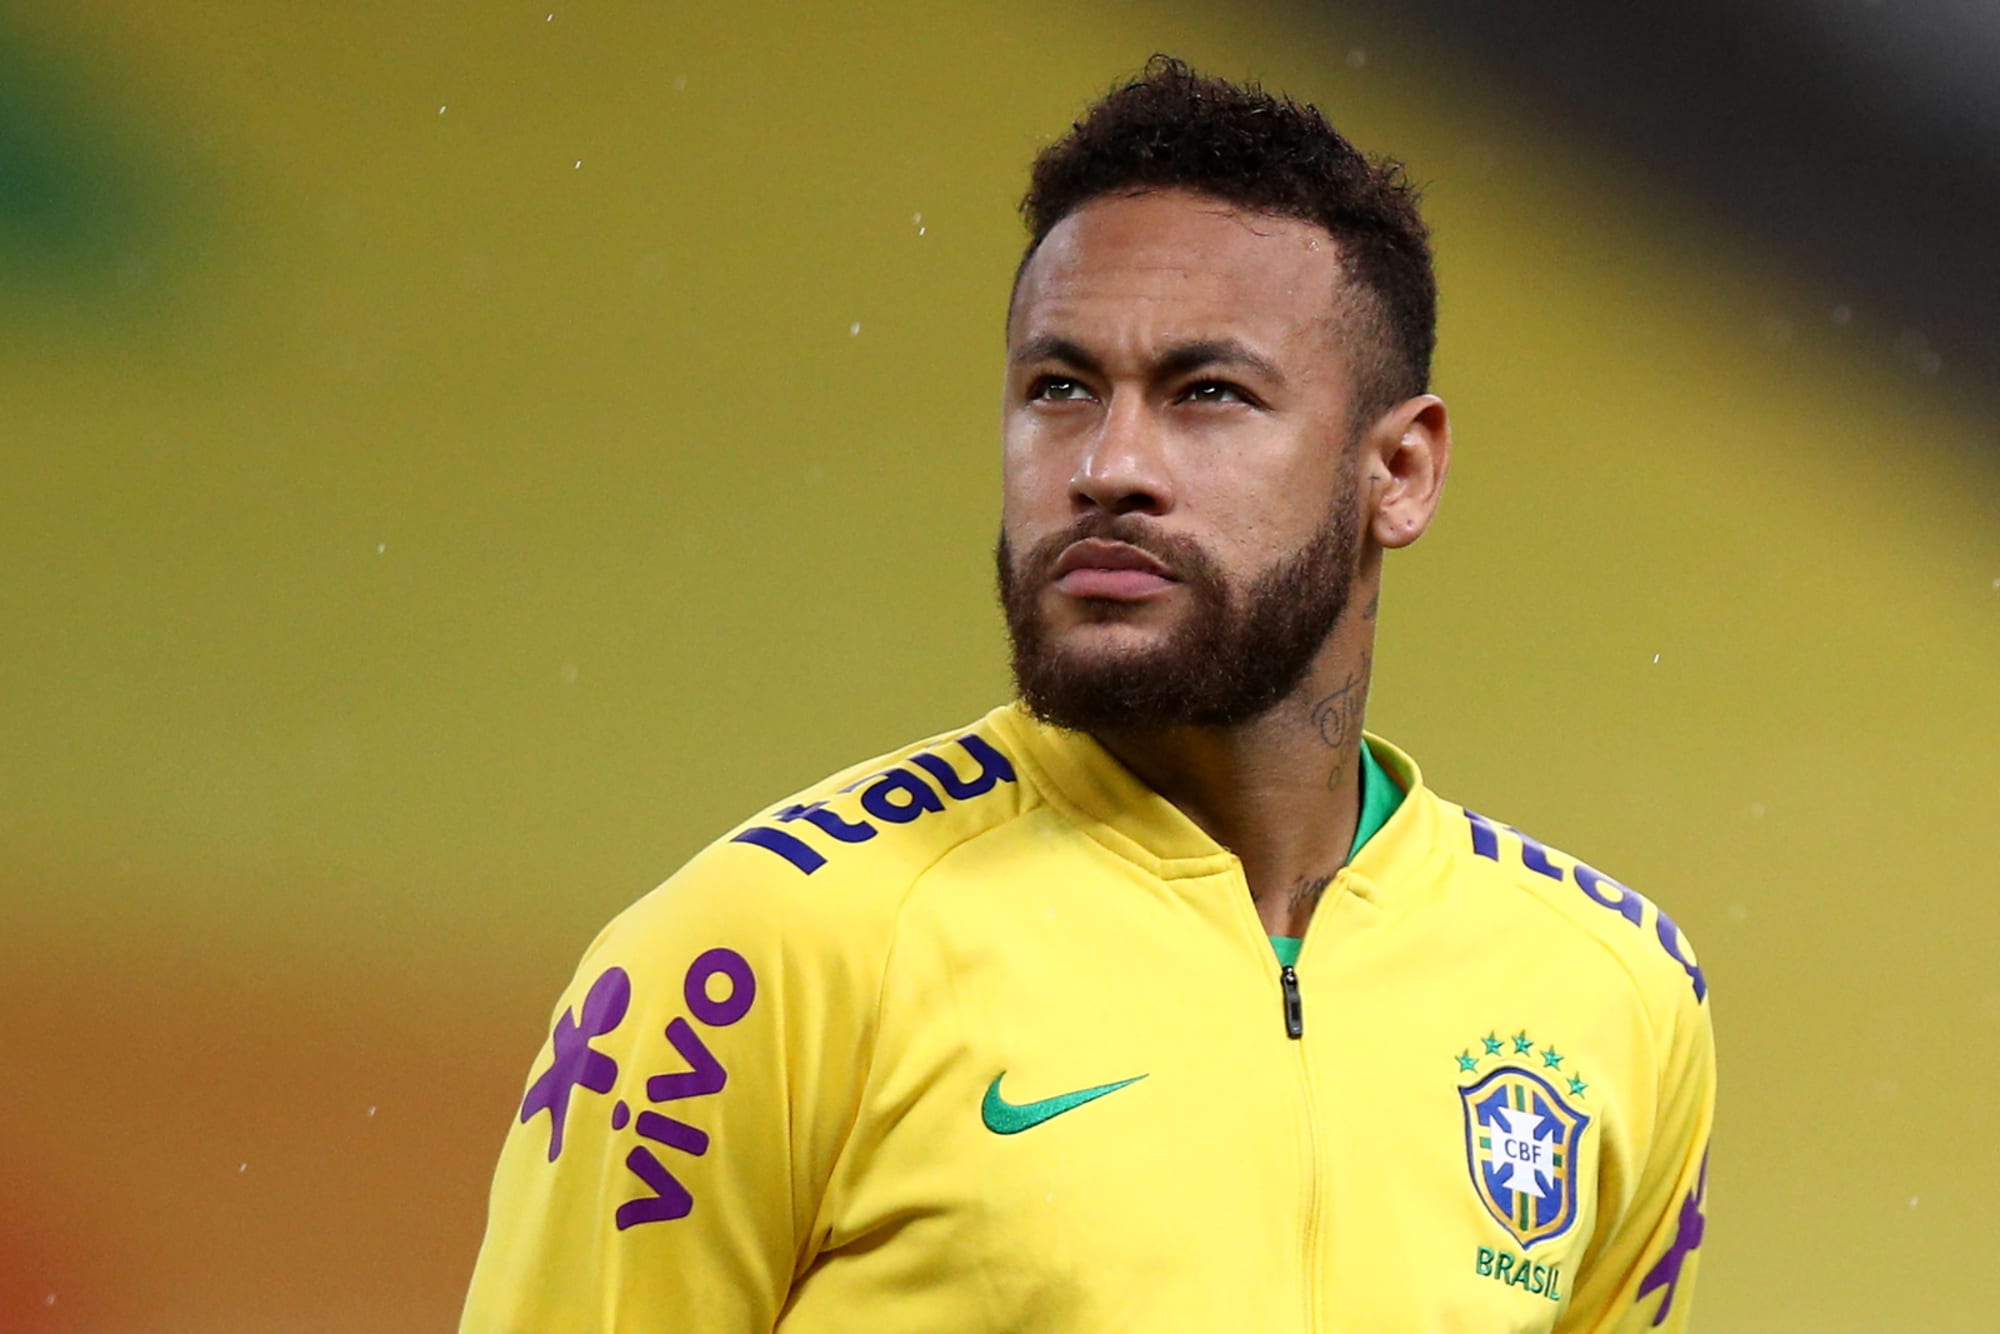 Neymar says 2022 World Cup could be his last